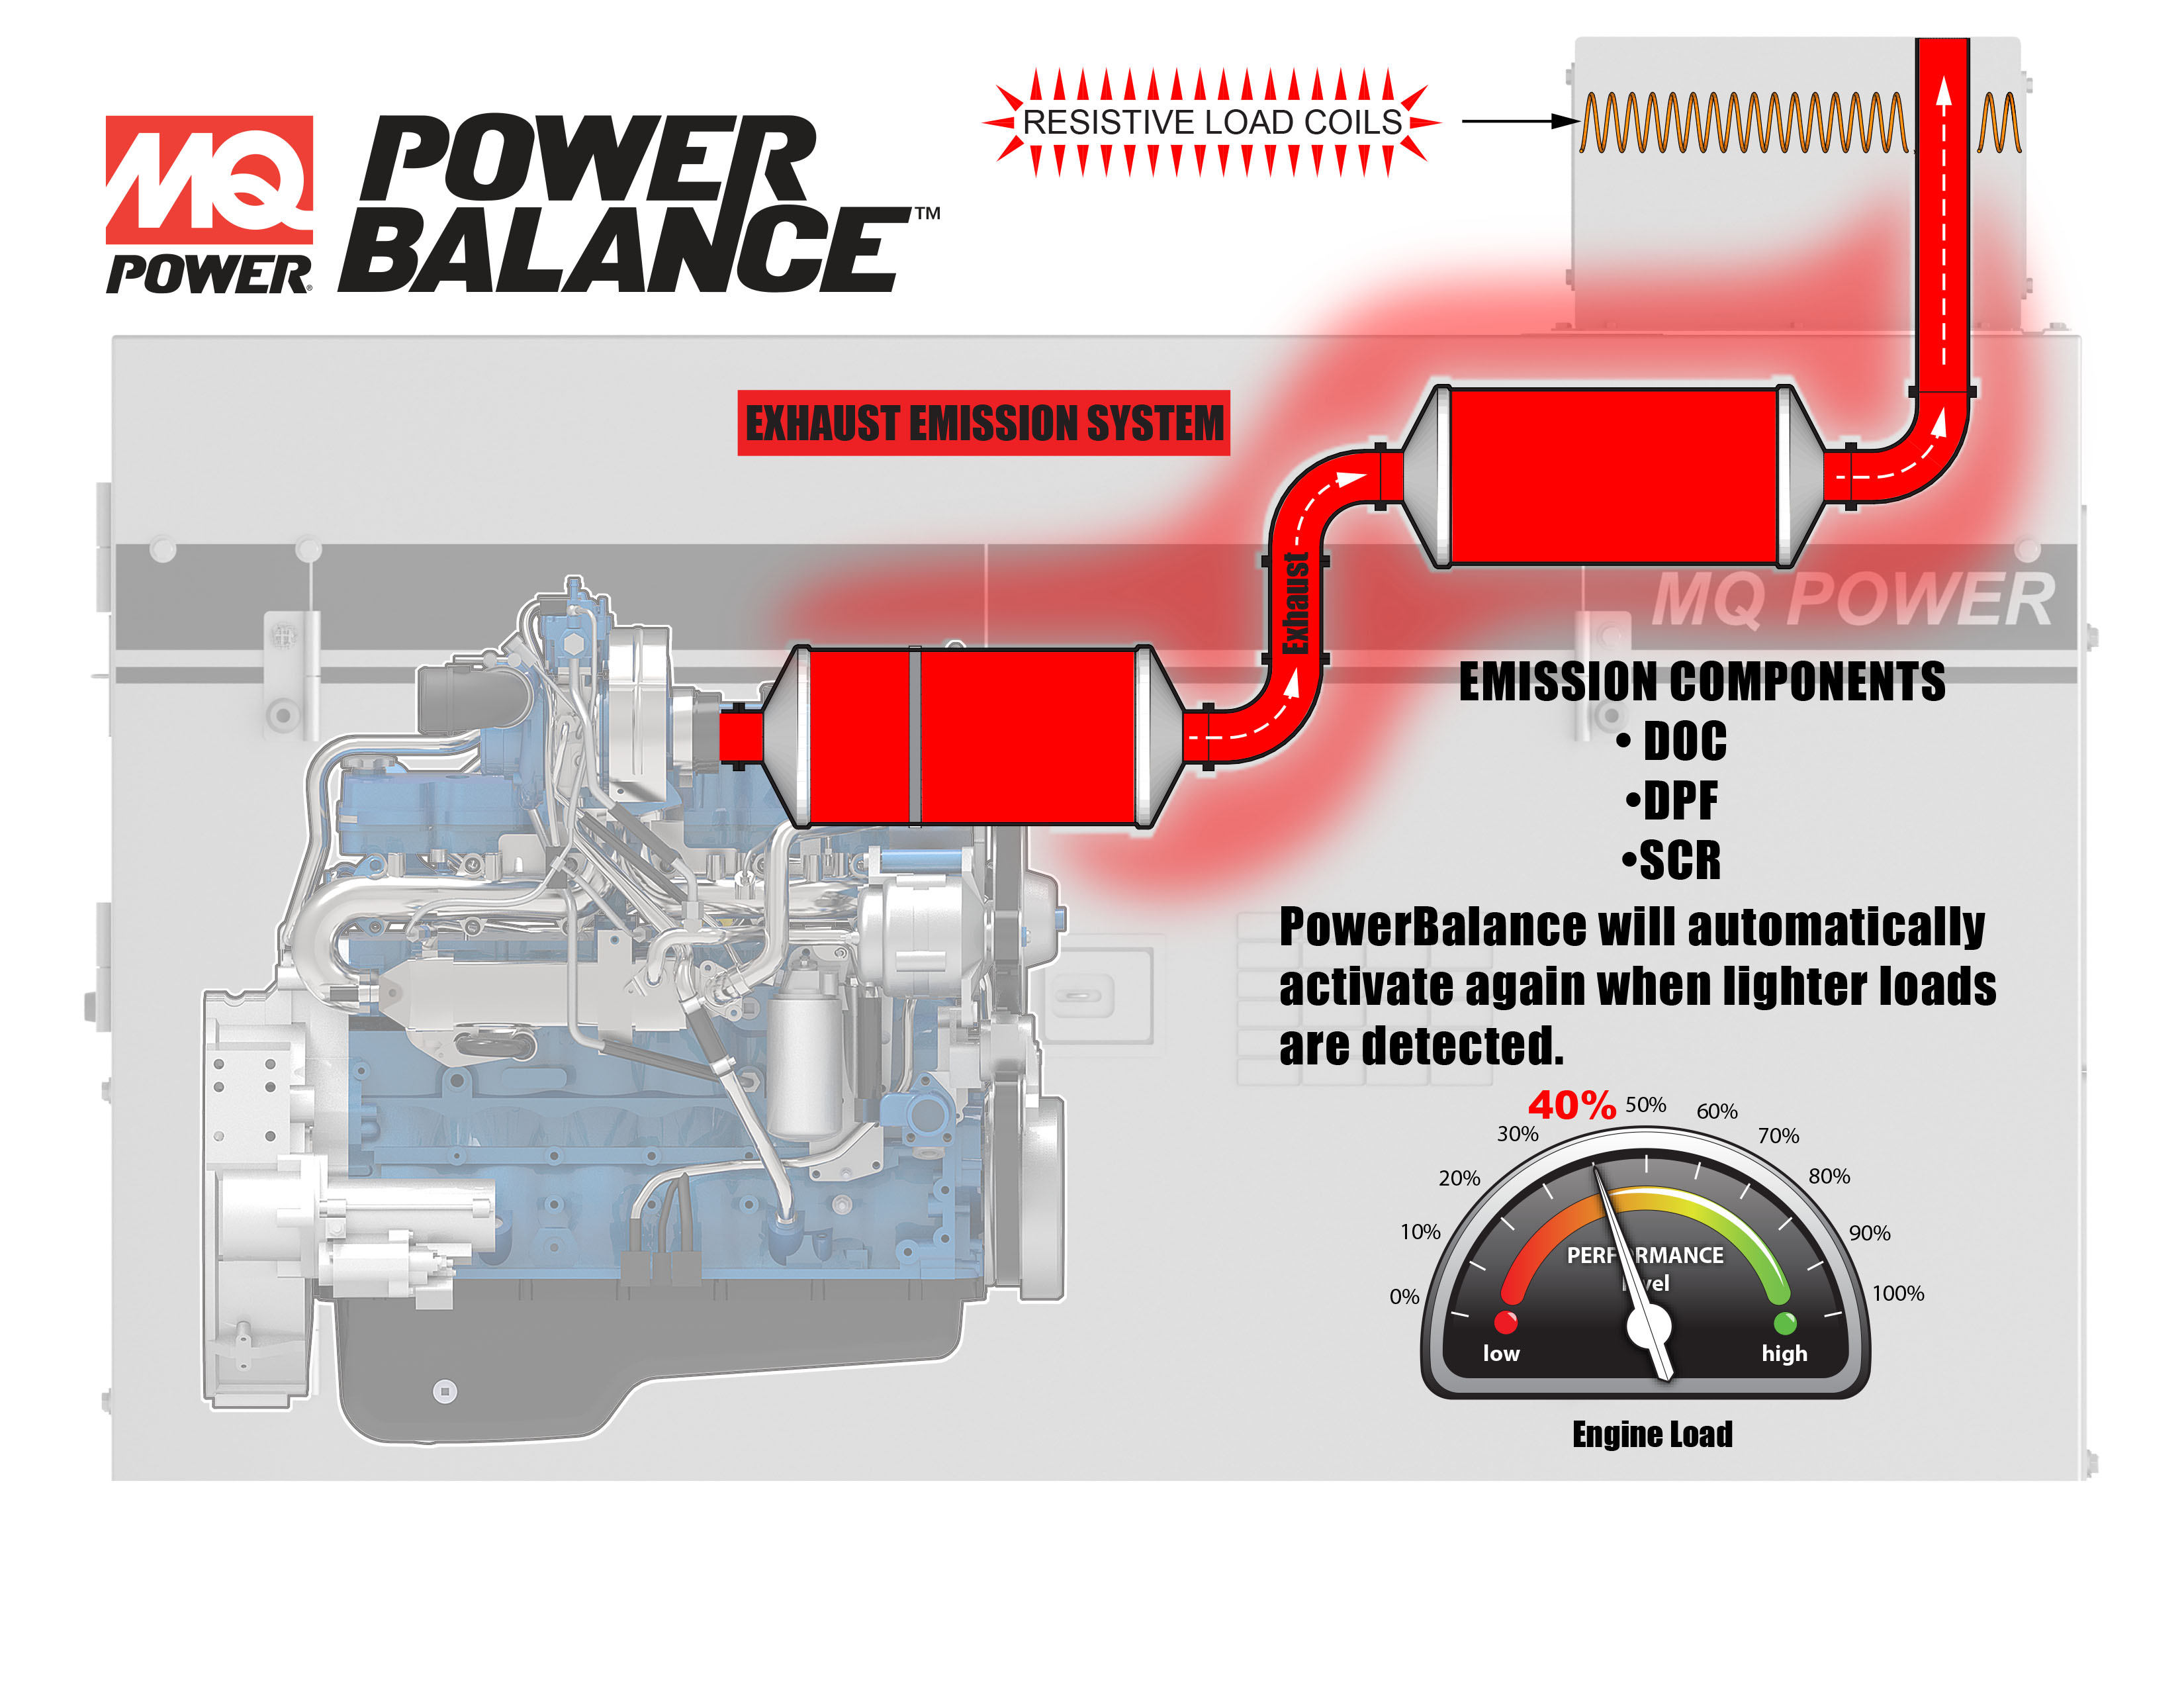 PowerBalance™ automatically reengages when lower loads are detected